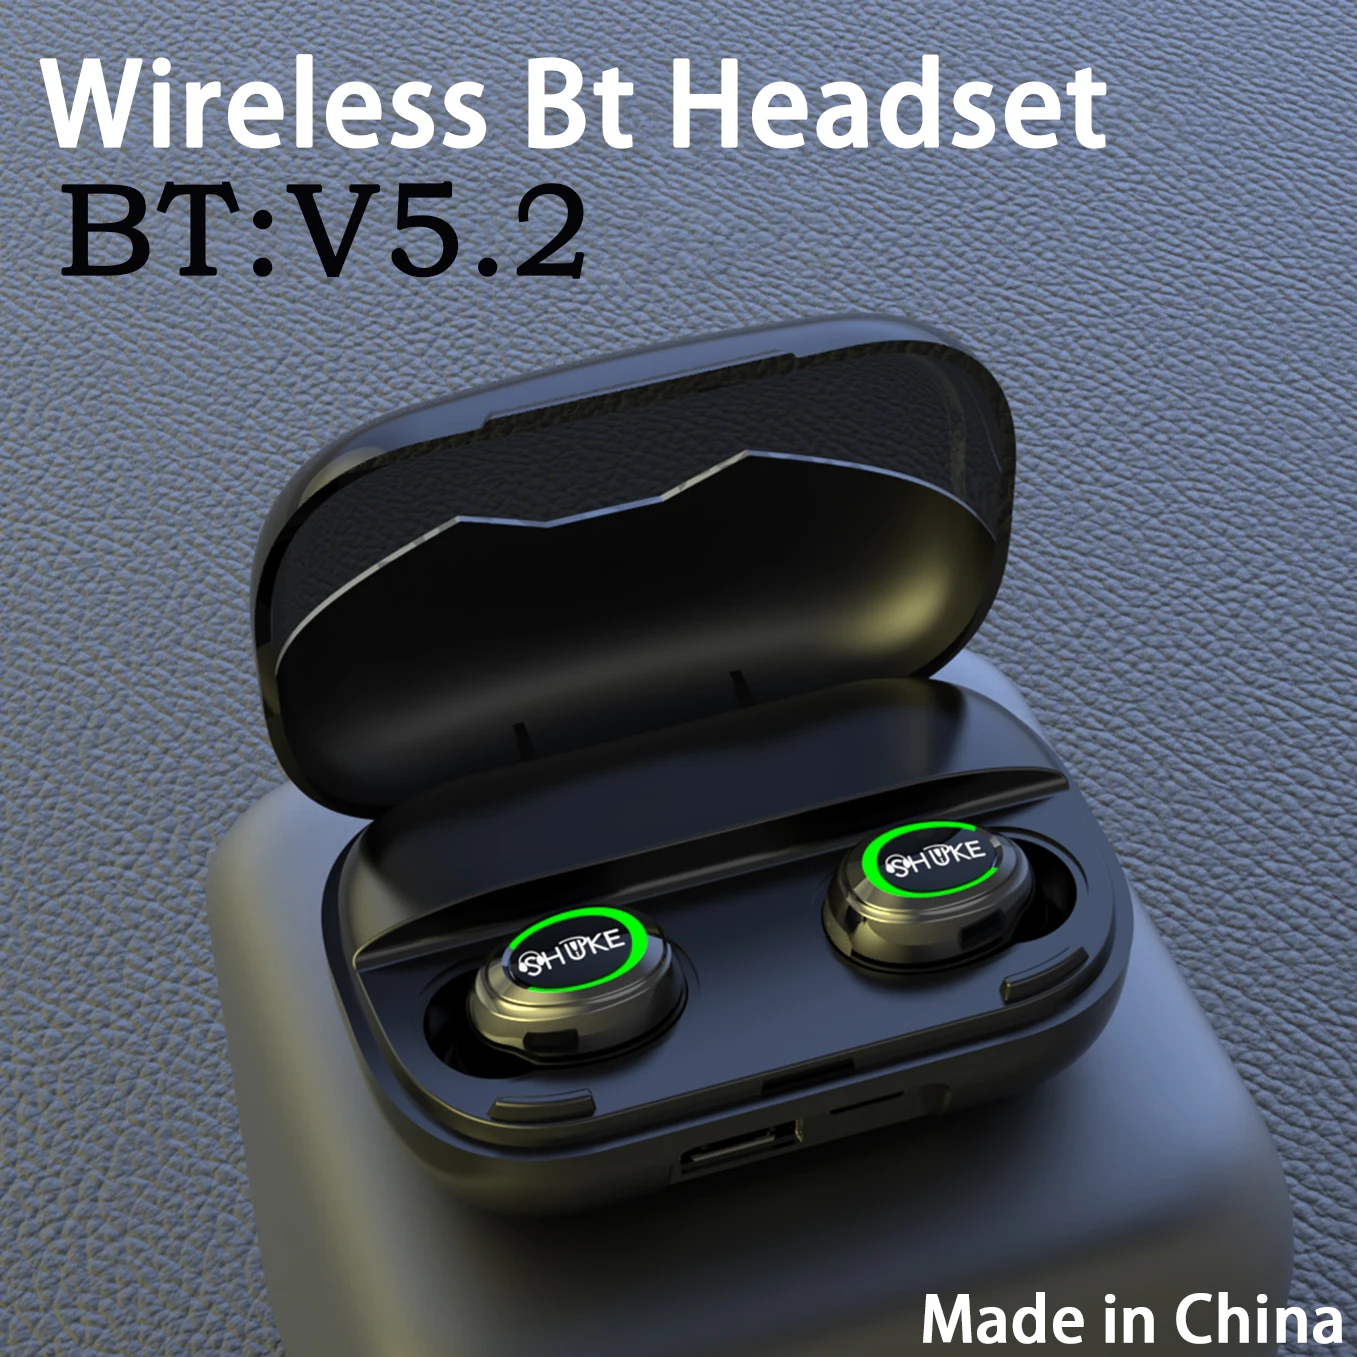 

TWS Bluetooth Earphones Wireless Headphones Key Control Headset Extra Long Standby Listening To Music For 15 Hours at a Time